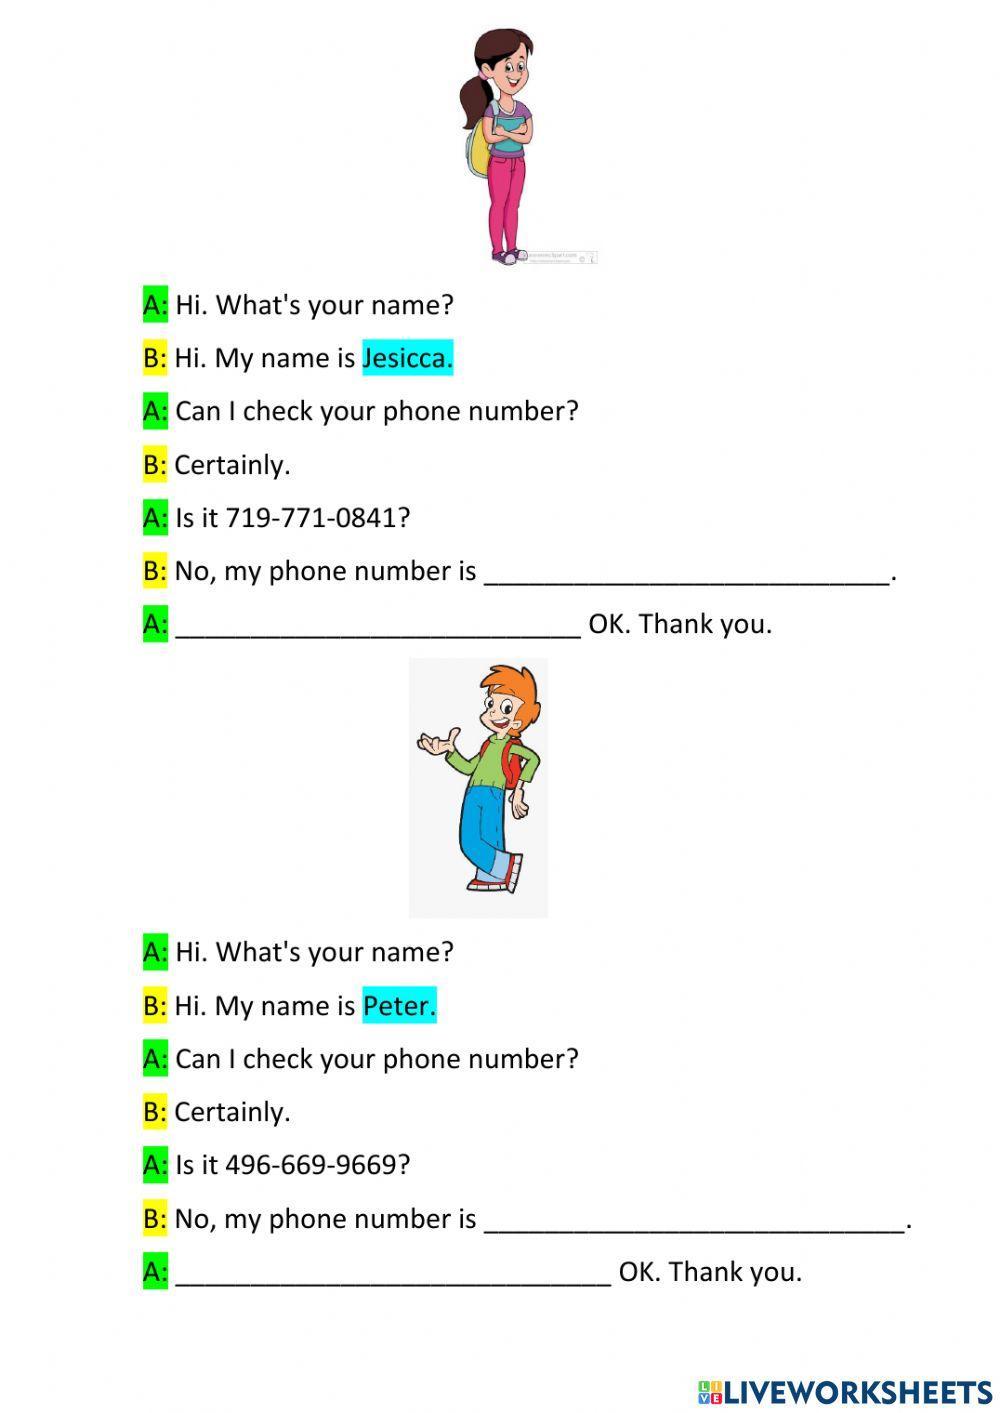 What is your phone number?